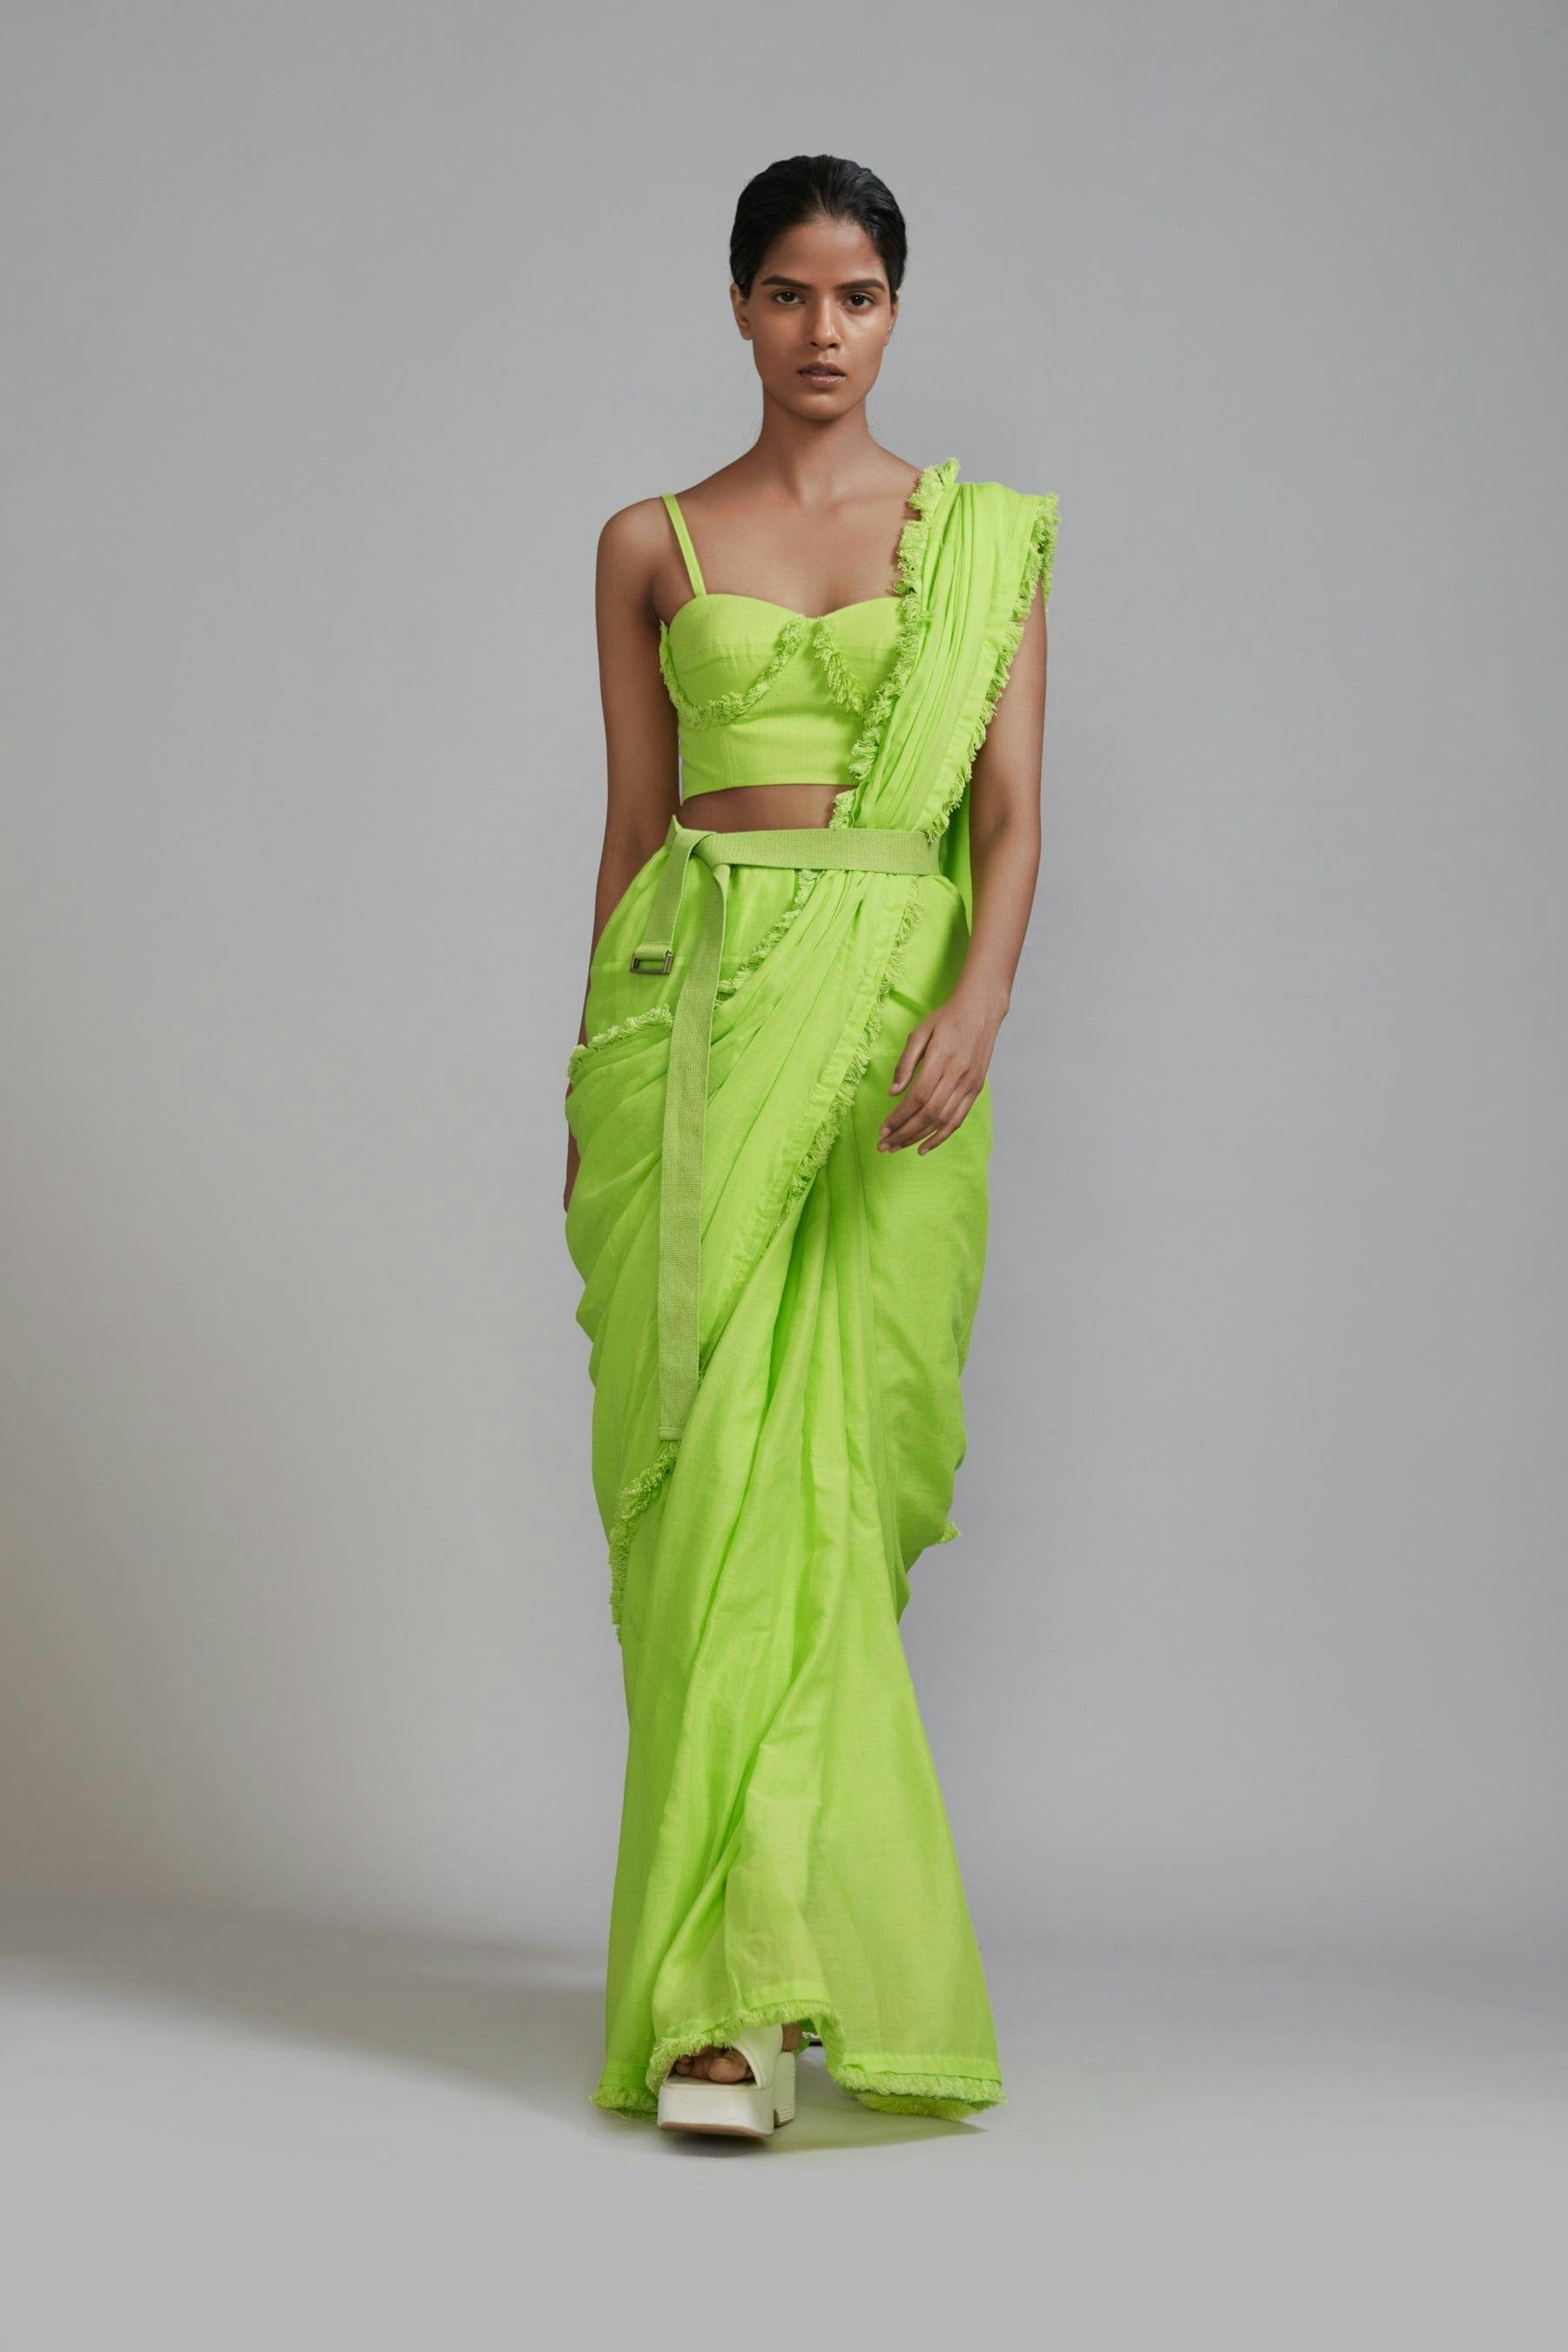 Neon Green Saree & Fringed Corset Set (2 PCS), a product by Style Mati